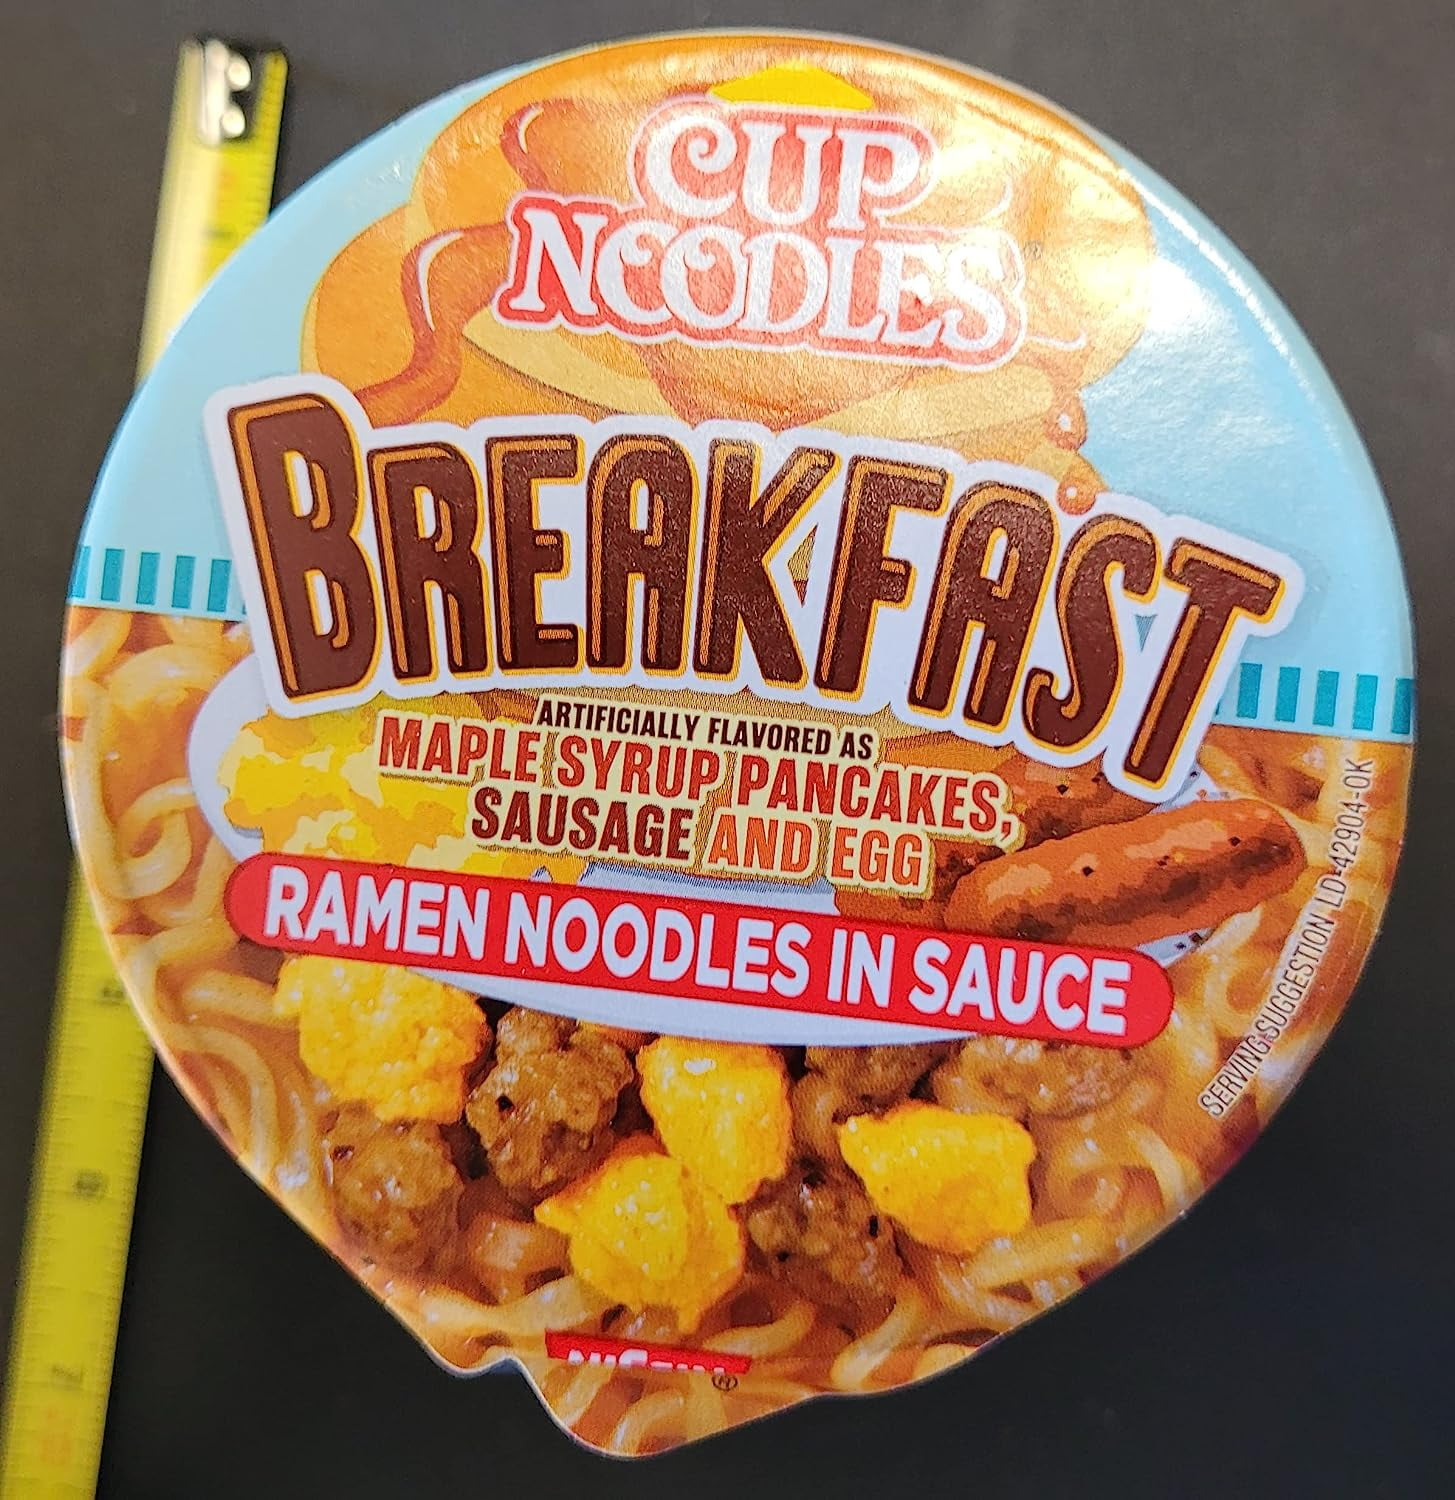 Nissin Cup Noodles Breakfast Flavored Ramen [Limited Edition], 2 Ounce Cup